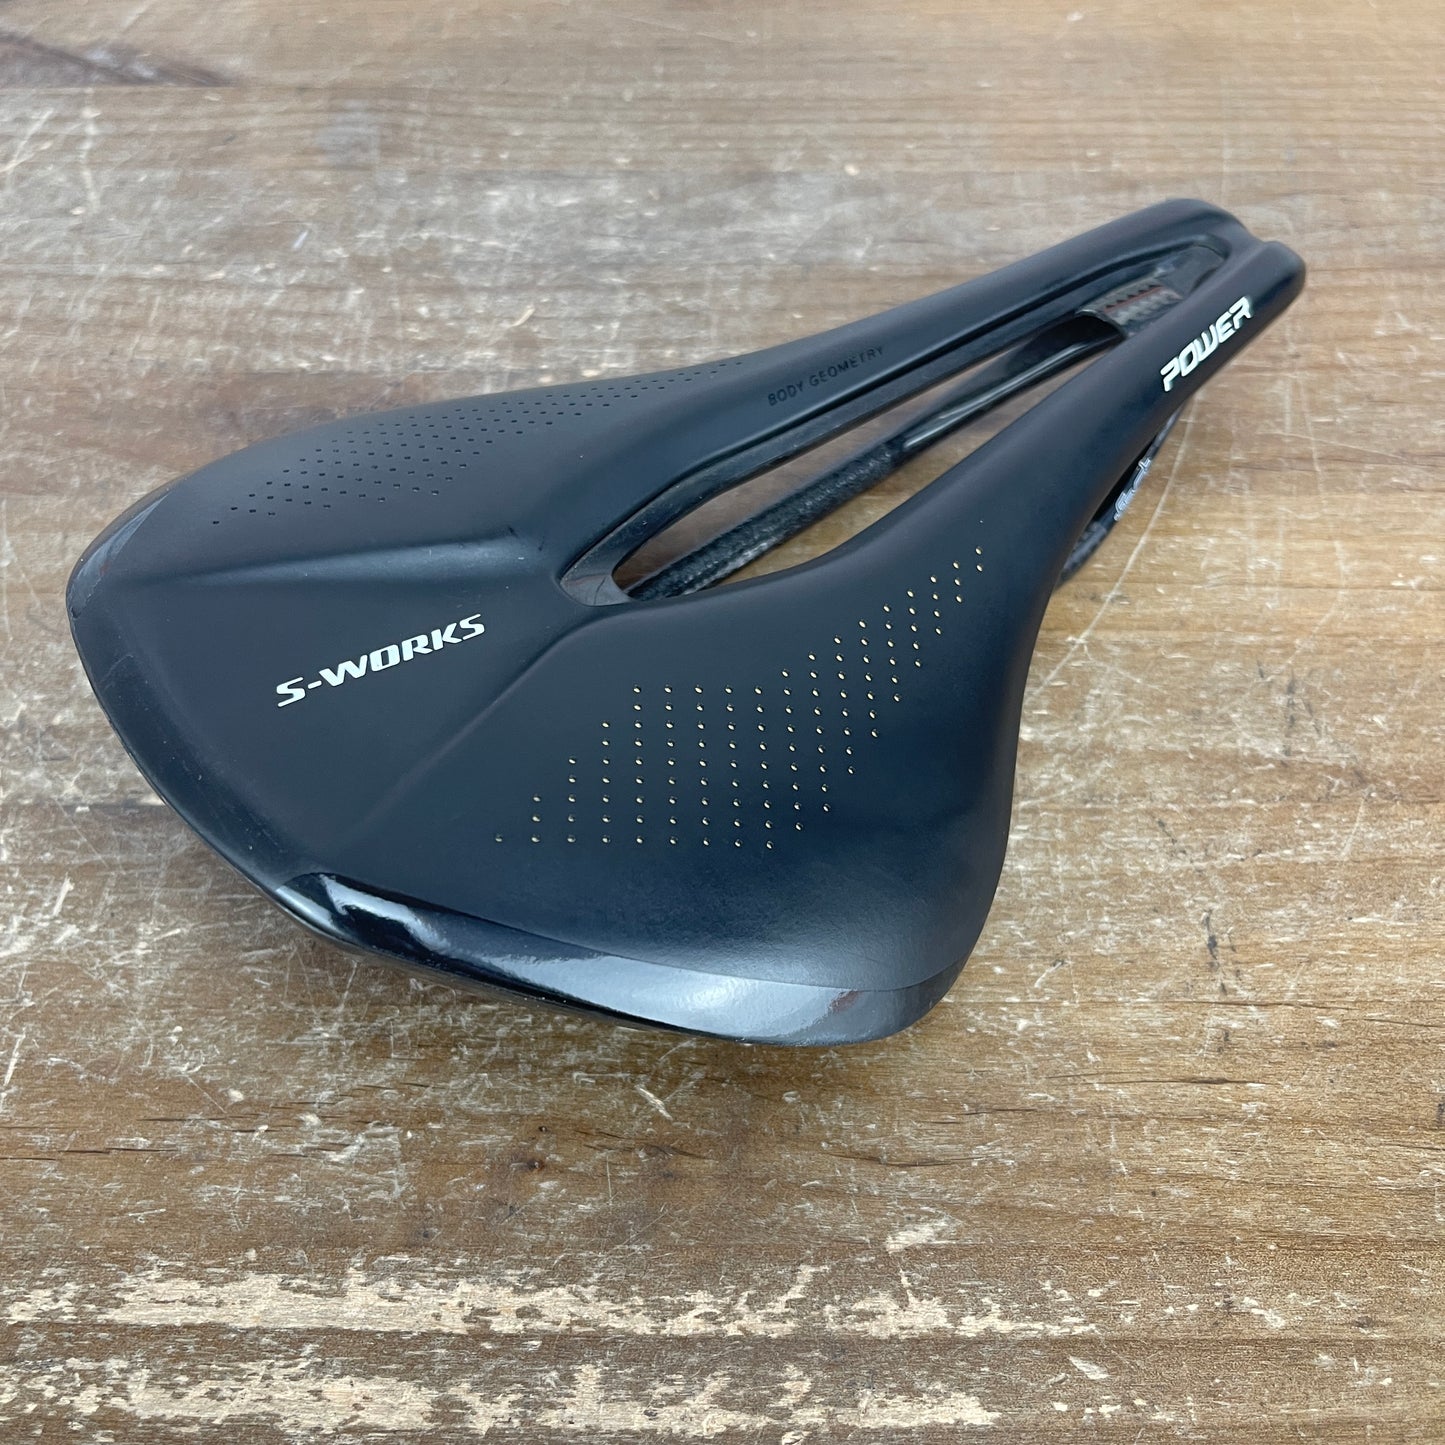 Specialized S-Works Power 7x9mm Carbon Rails 143mm Cycling Saddle